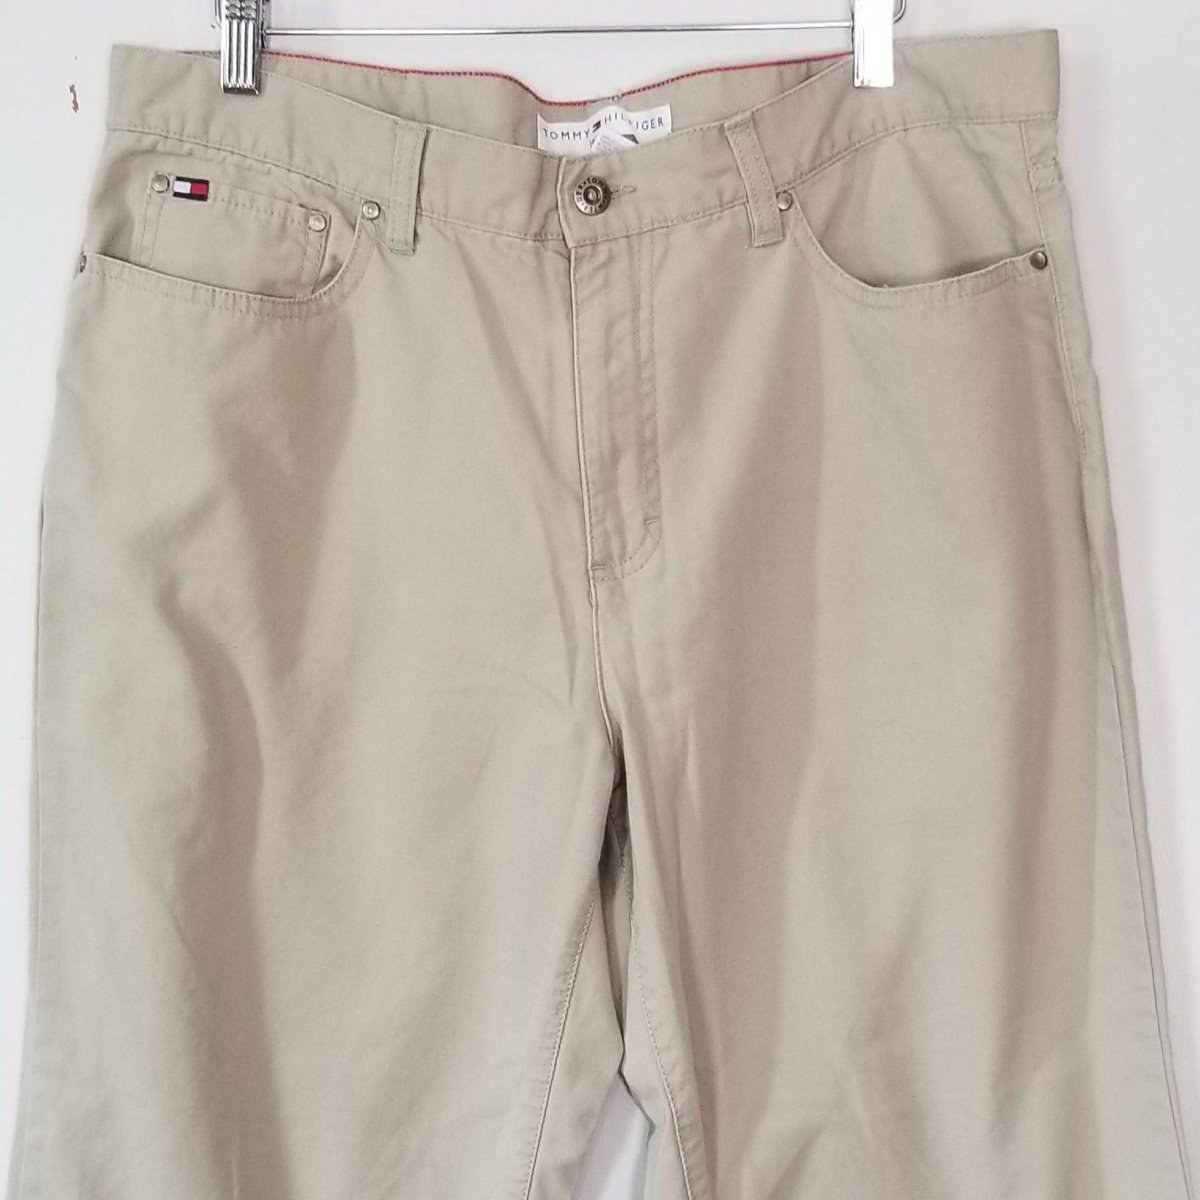 Y2K Cropped Tommy Khaki Pants Women 14 Waist 36 - themallvintage The Mall Vintage